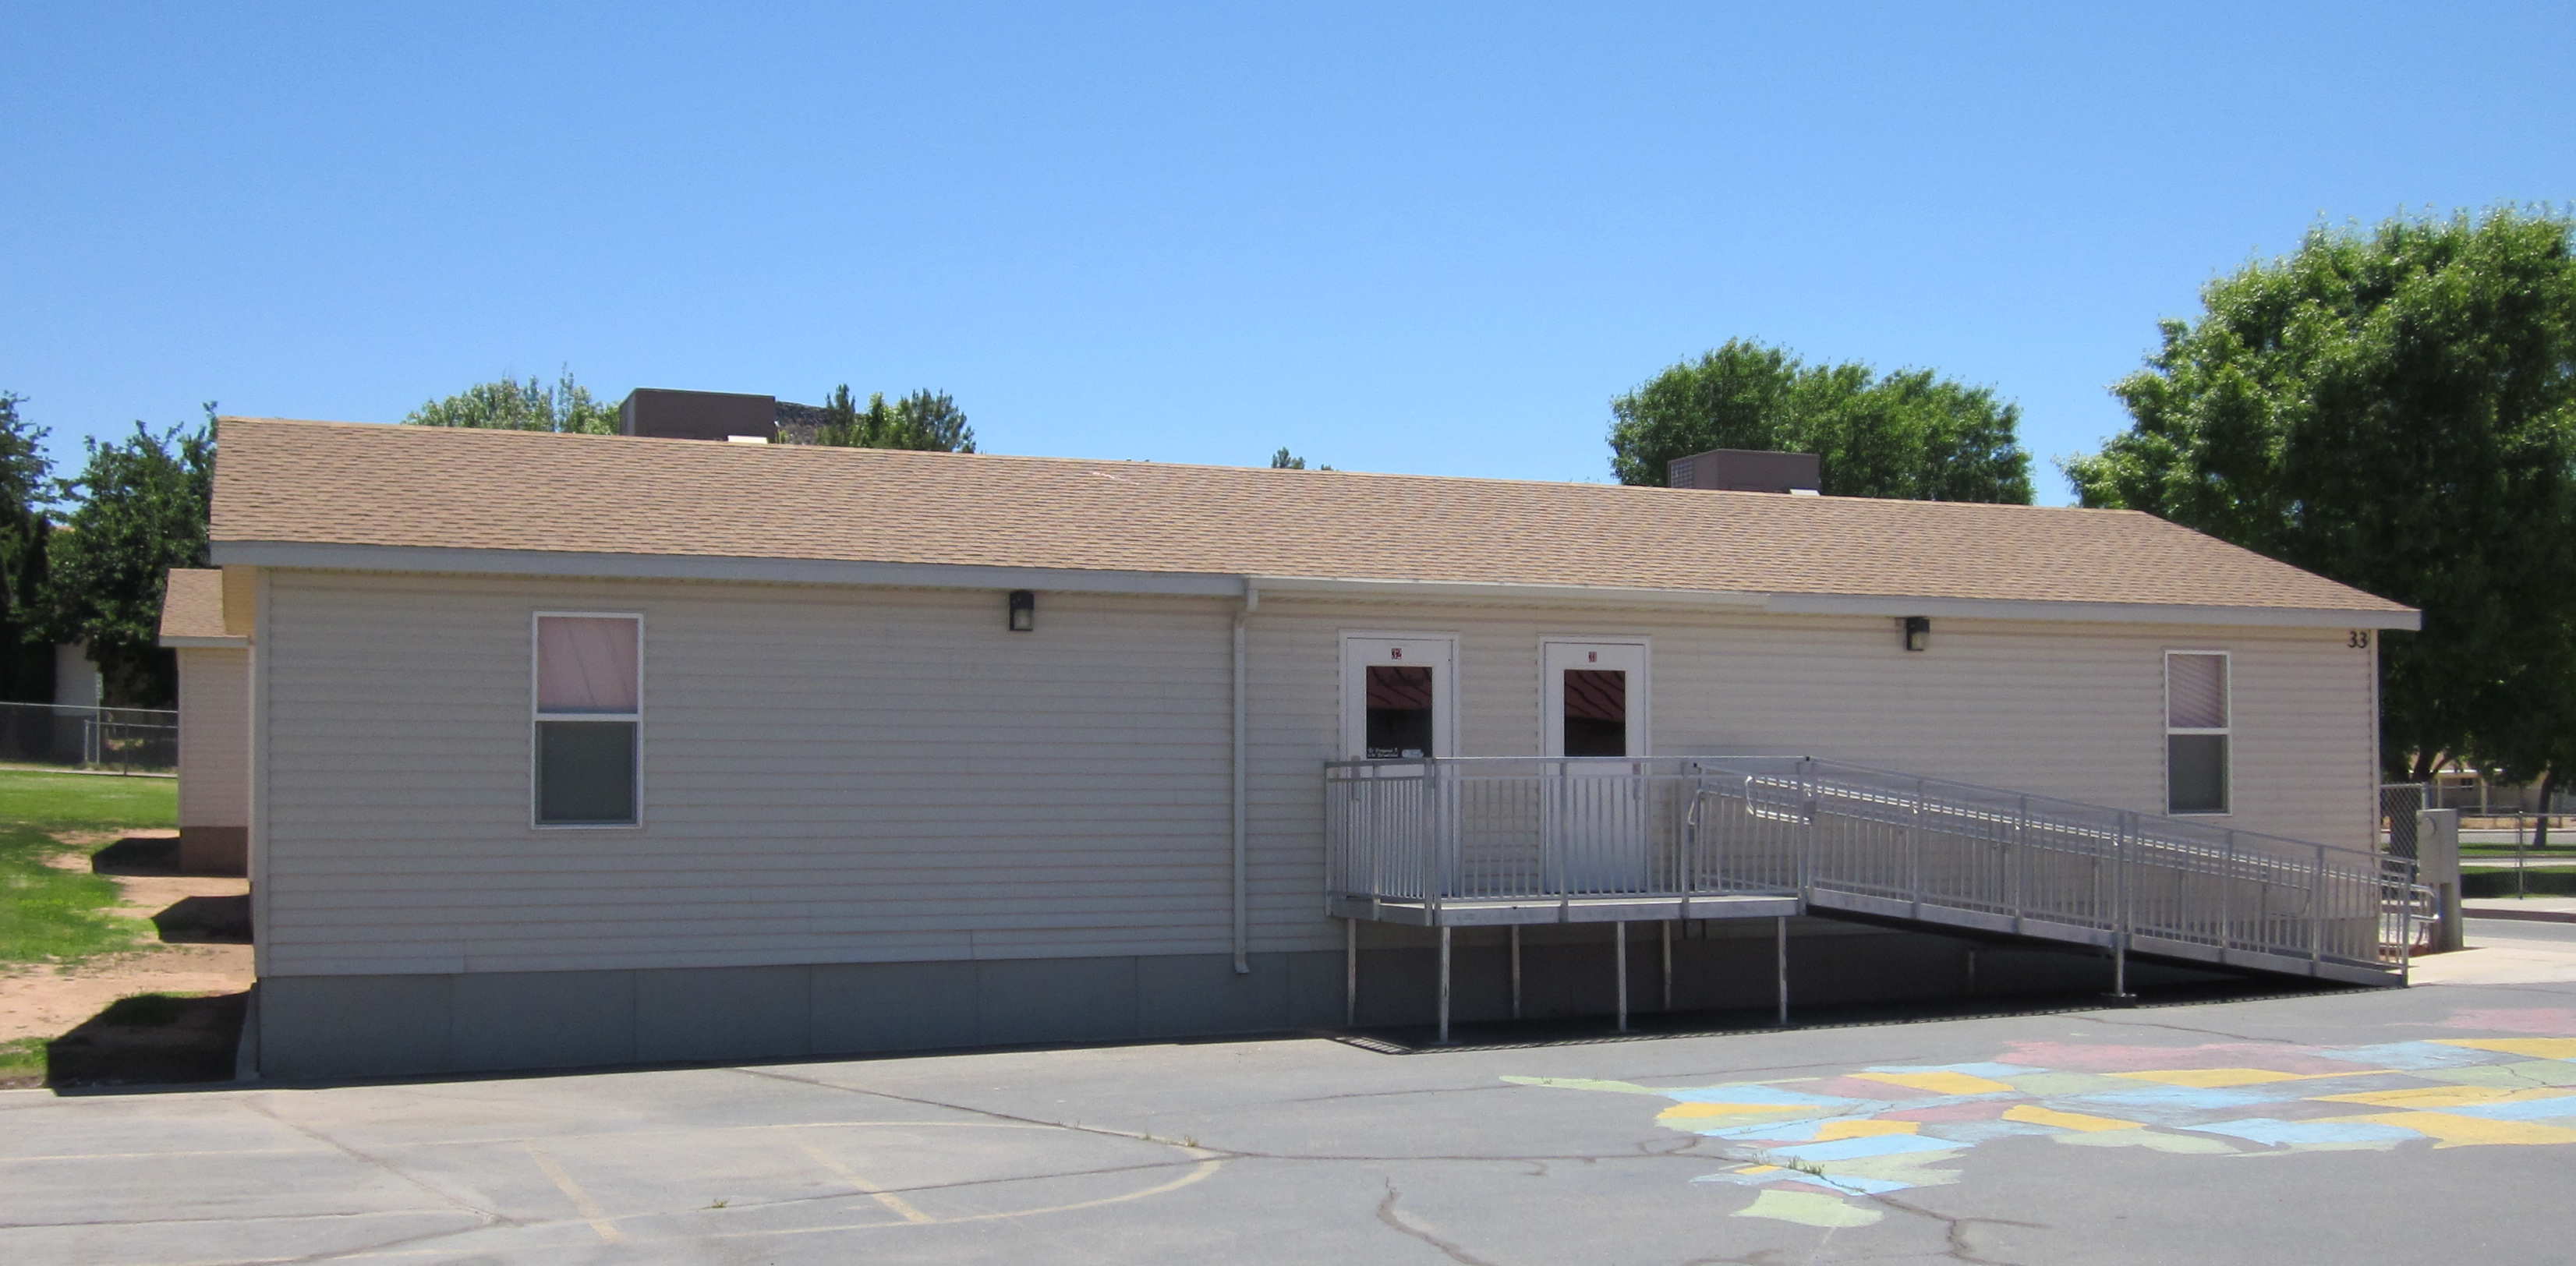 One of the auxiliary classrooms at Sunset Elementary School